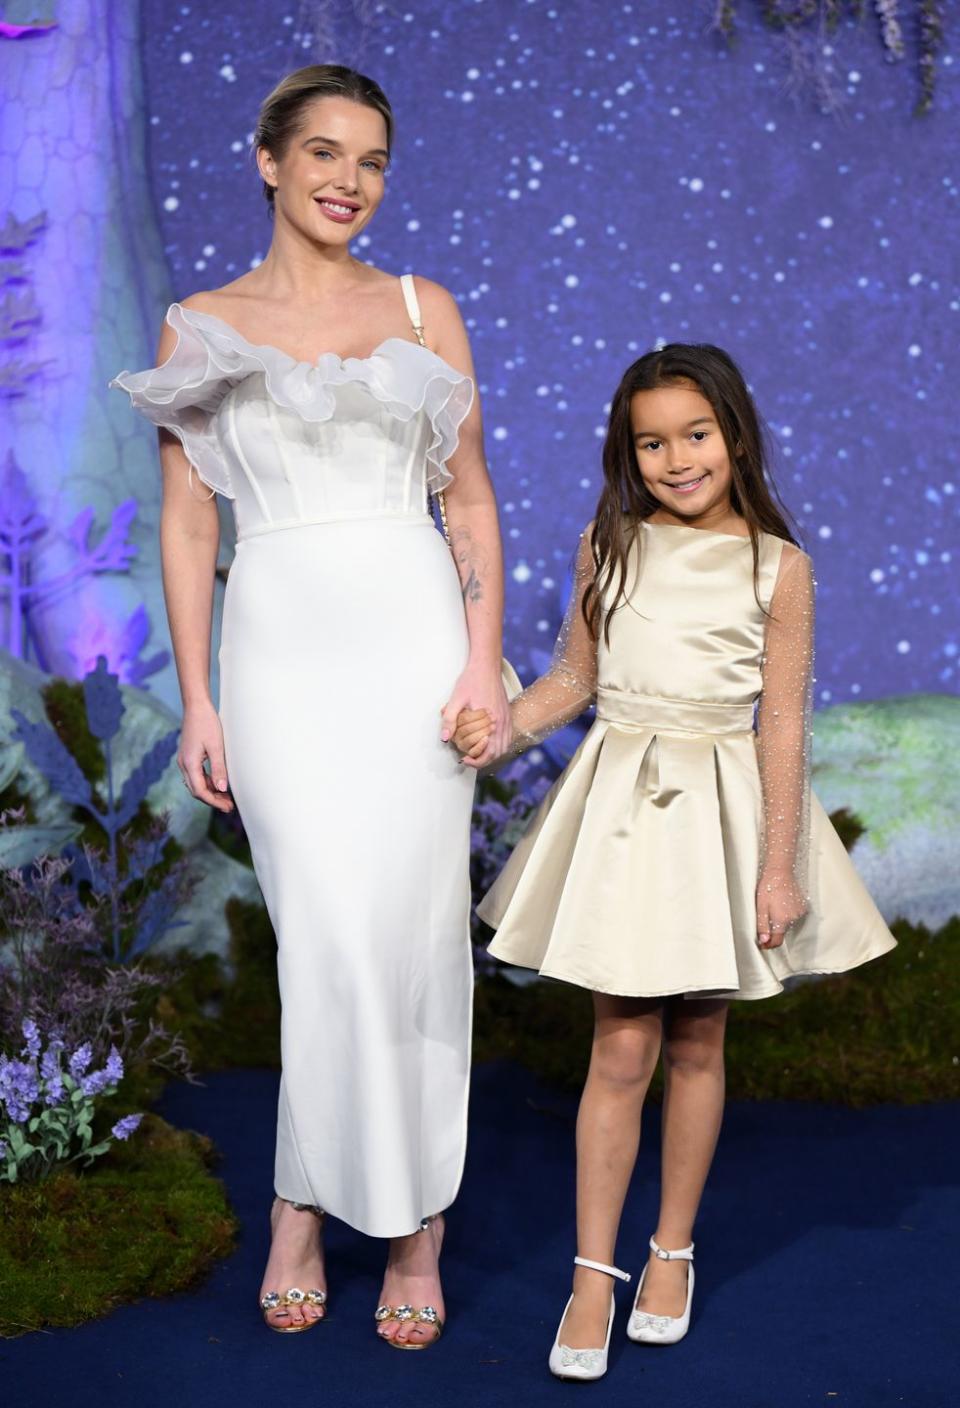 helen flanagan, a woman wearing a white dress, holding hands with a child, also in a white dress, smiling and standing in front of a purple background at the wish movie premiere in 2023